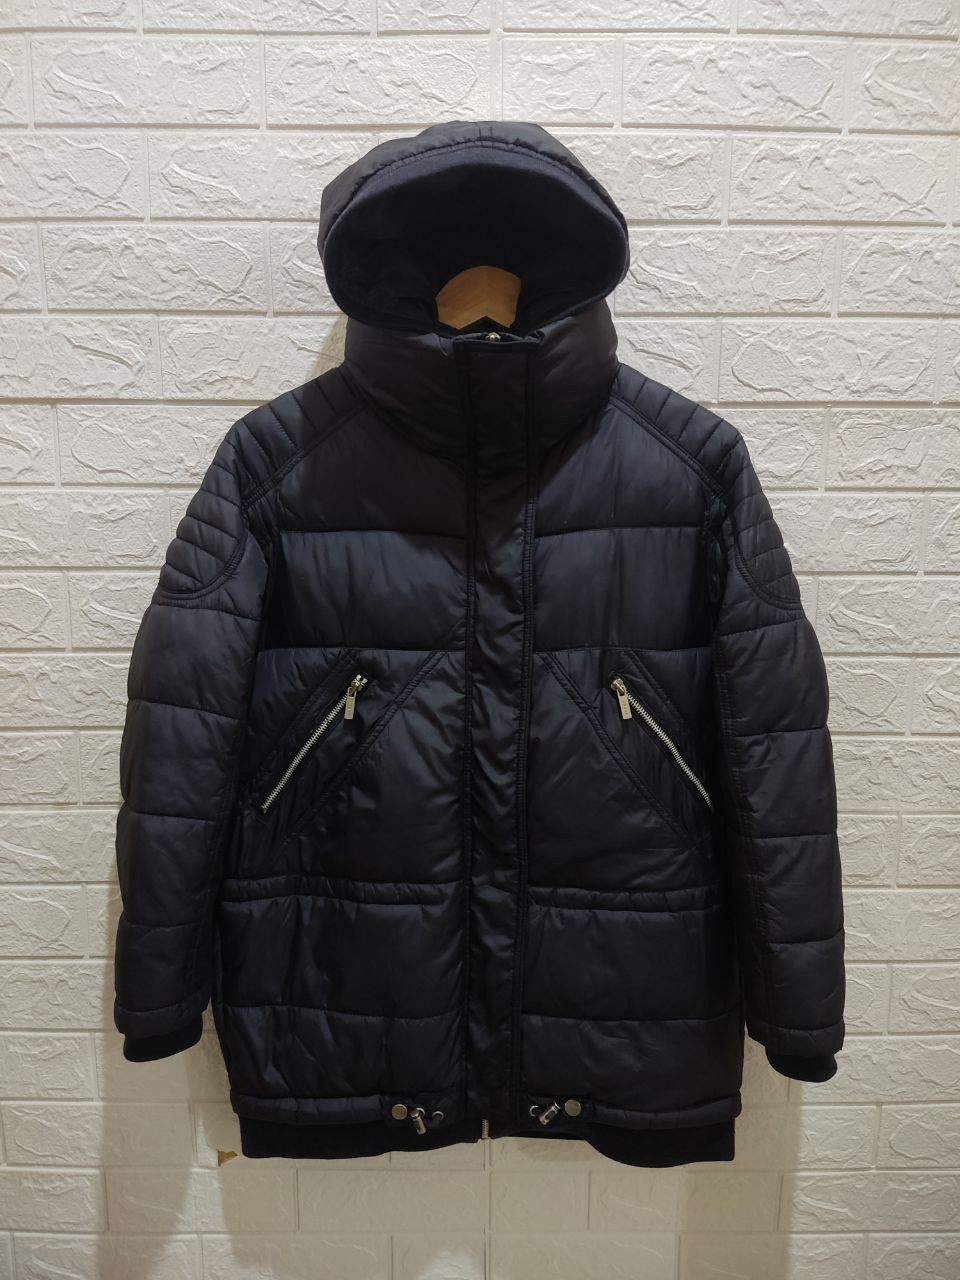 Archival Clothing - Codes Combine Hooded Puffer Down Jacket - 2